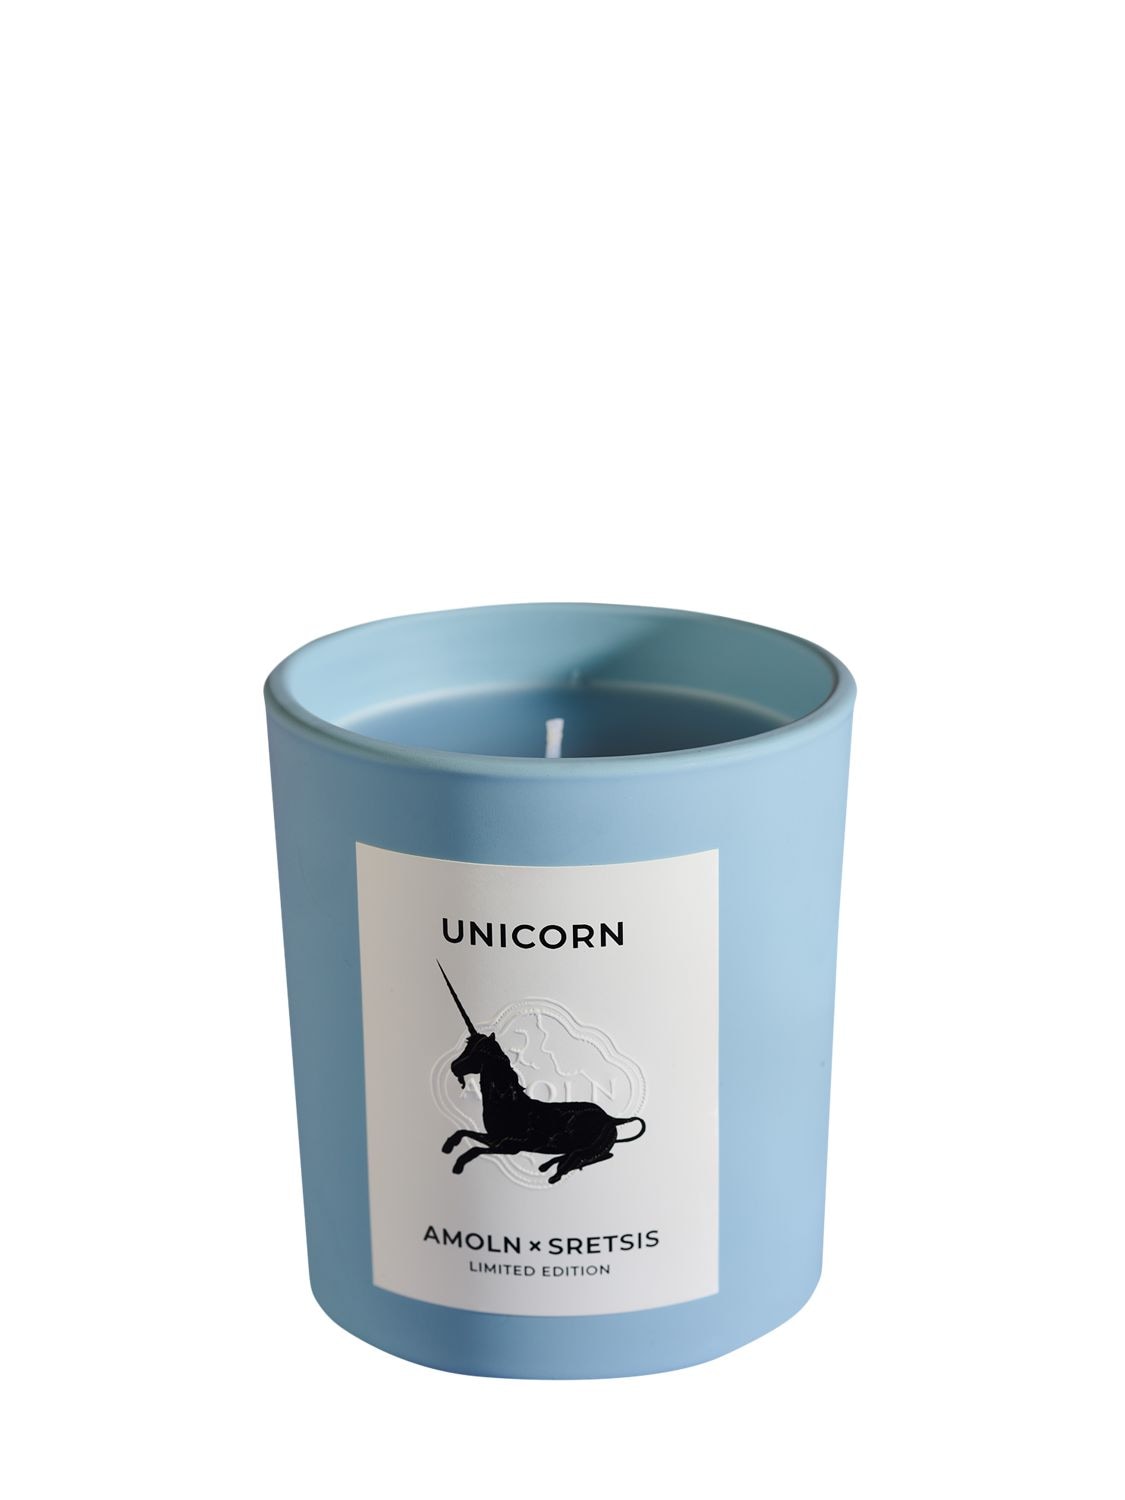 Amoln Unicorn Limited Edition Scented Candle In Blue